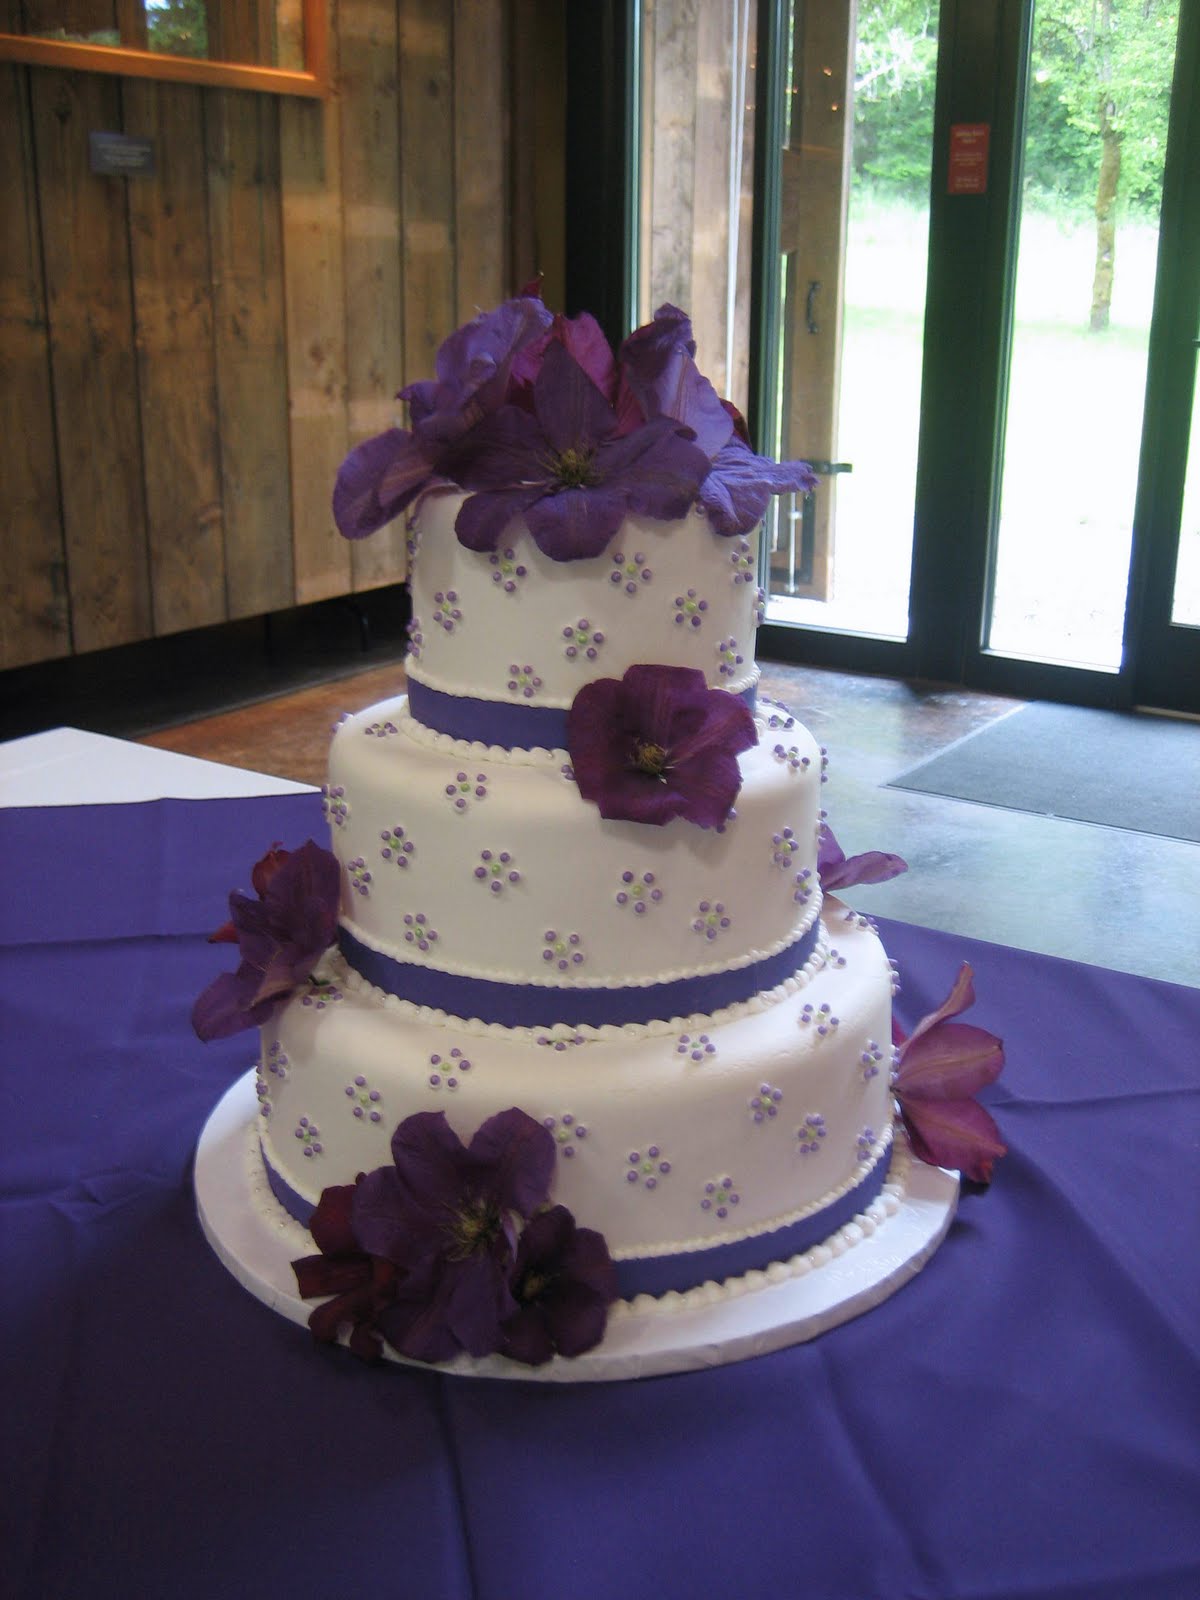 wedding cake designs with flowers The accent color to the royal purple was lime green and since it was 